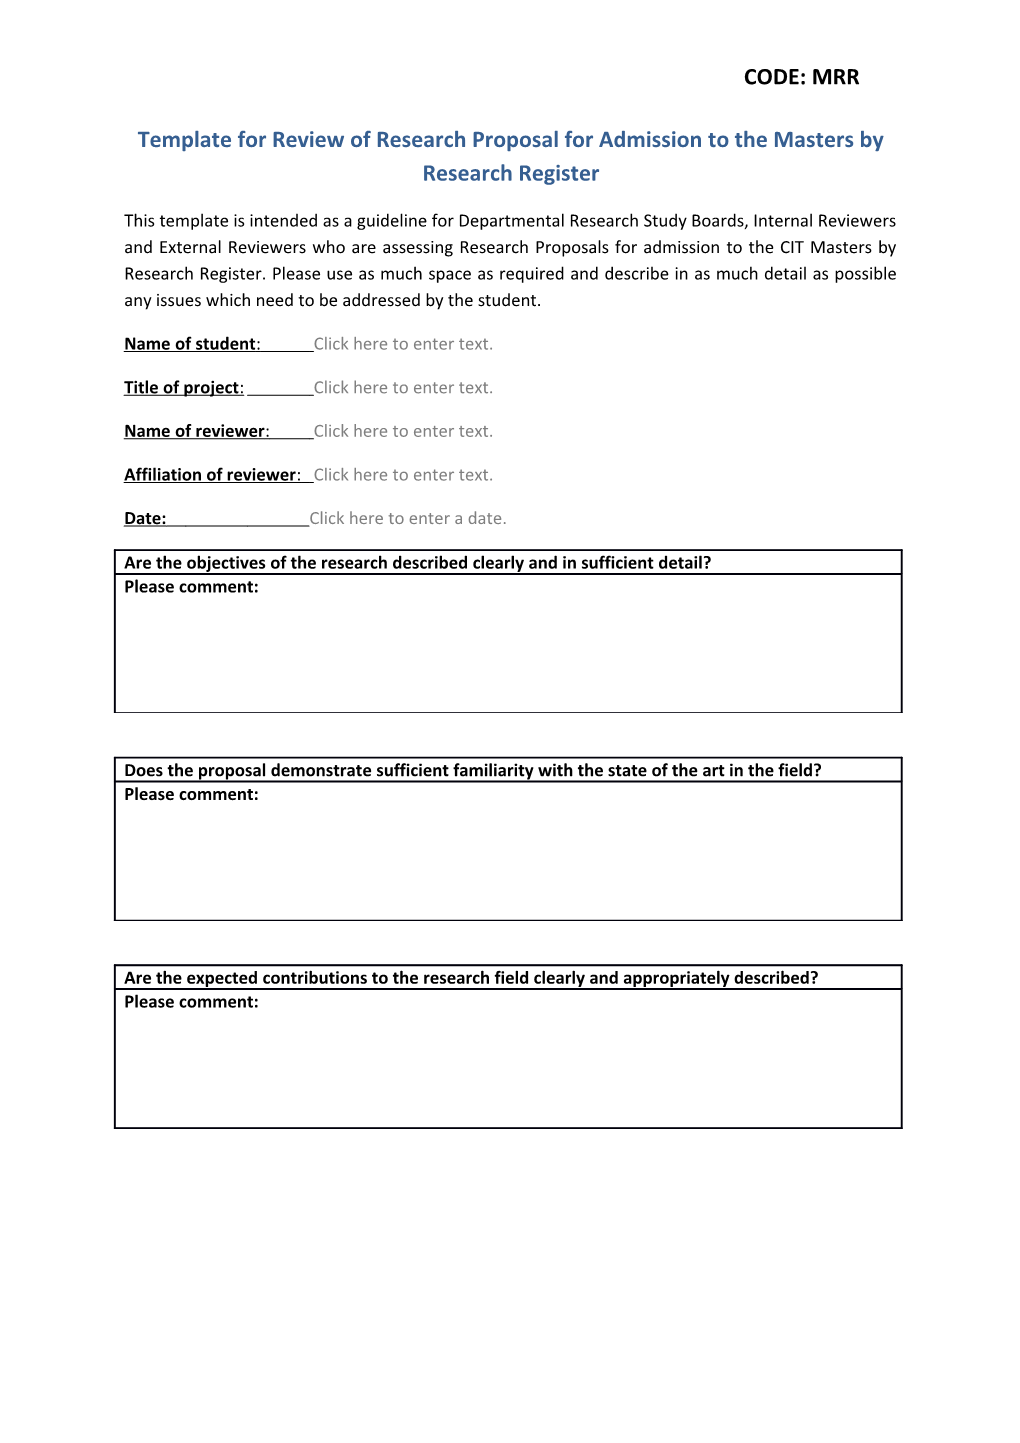 Template for Review of Research Proposal for Admission to the Masters by Research Register